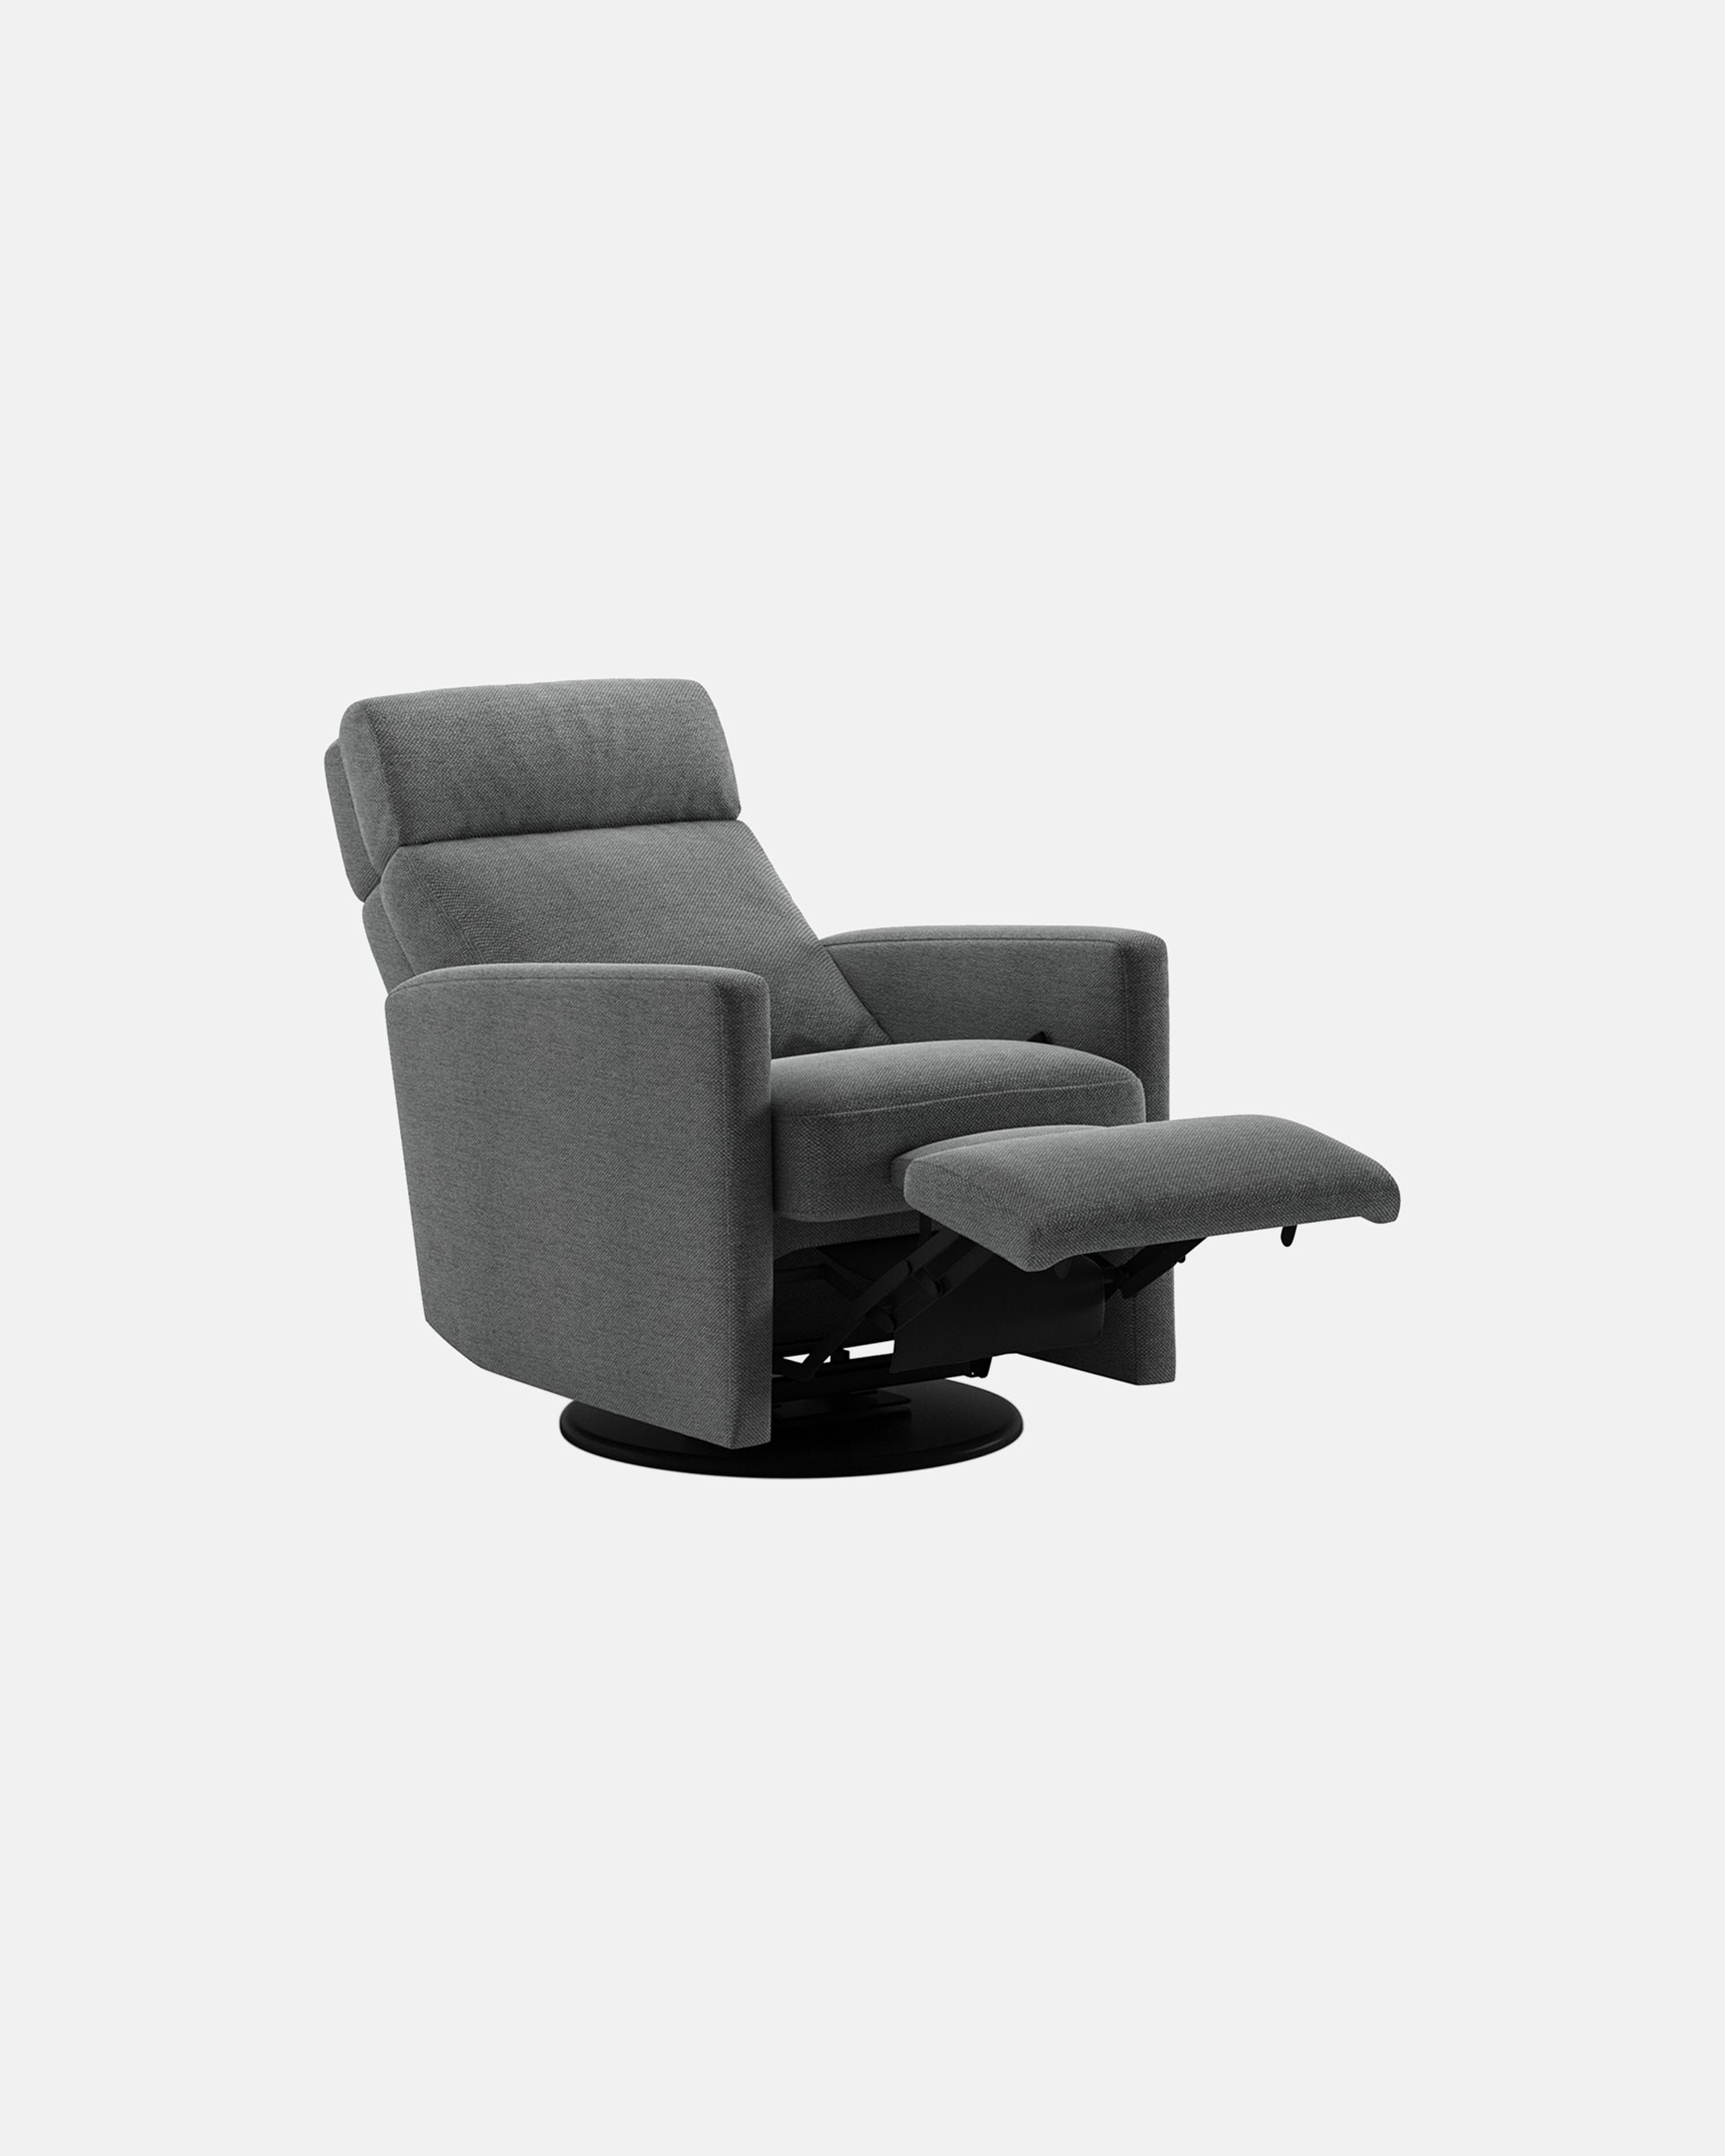 Track Manual Recliner Chair